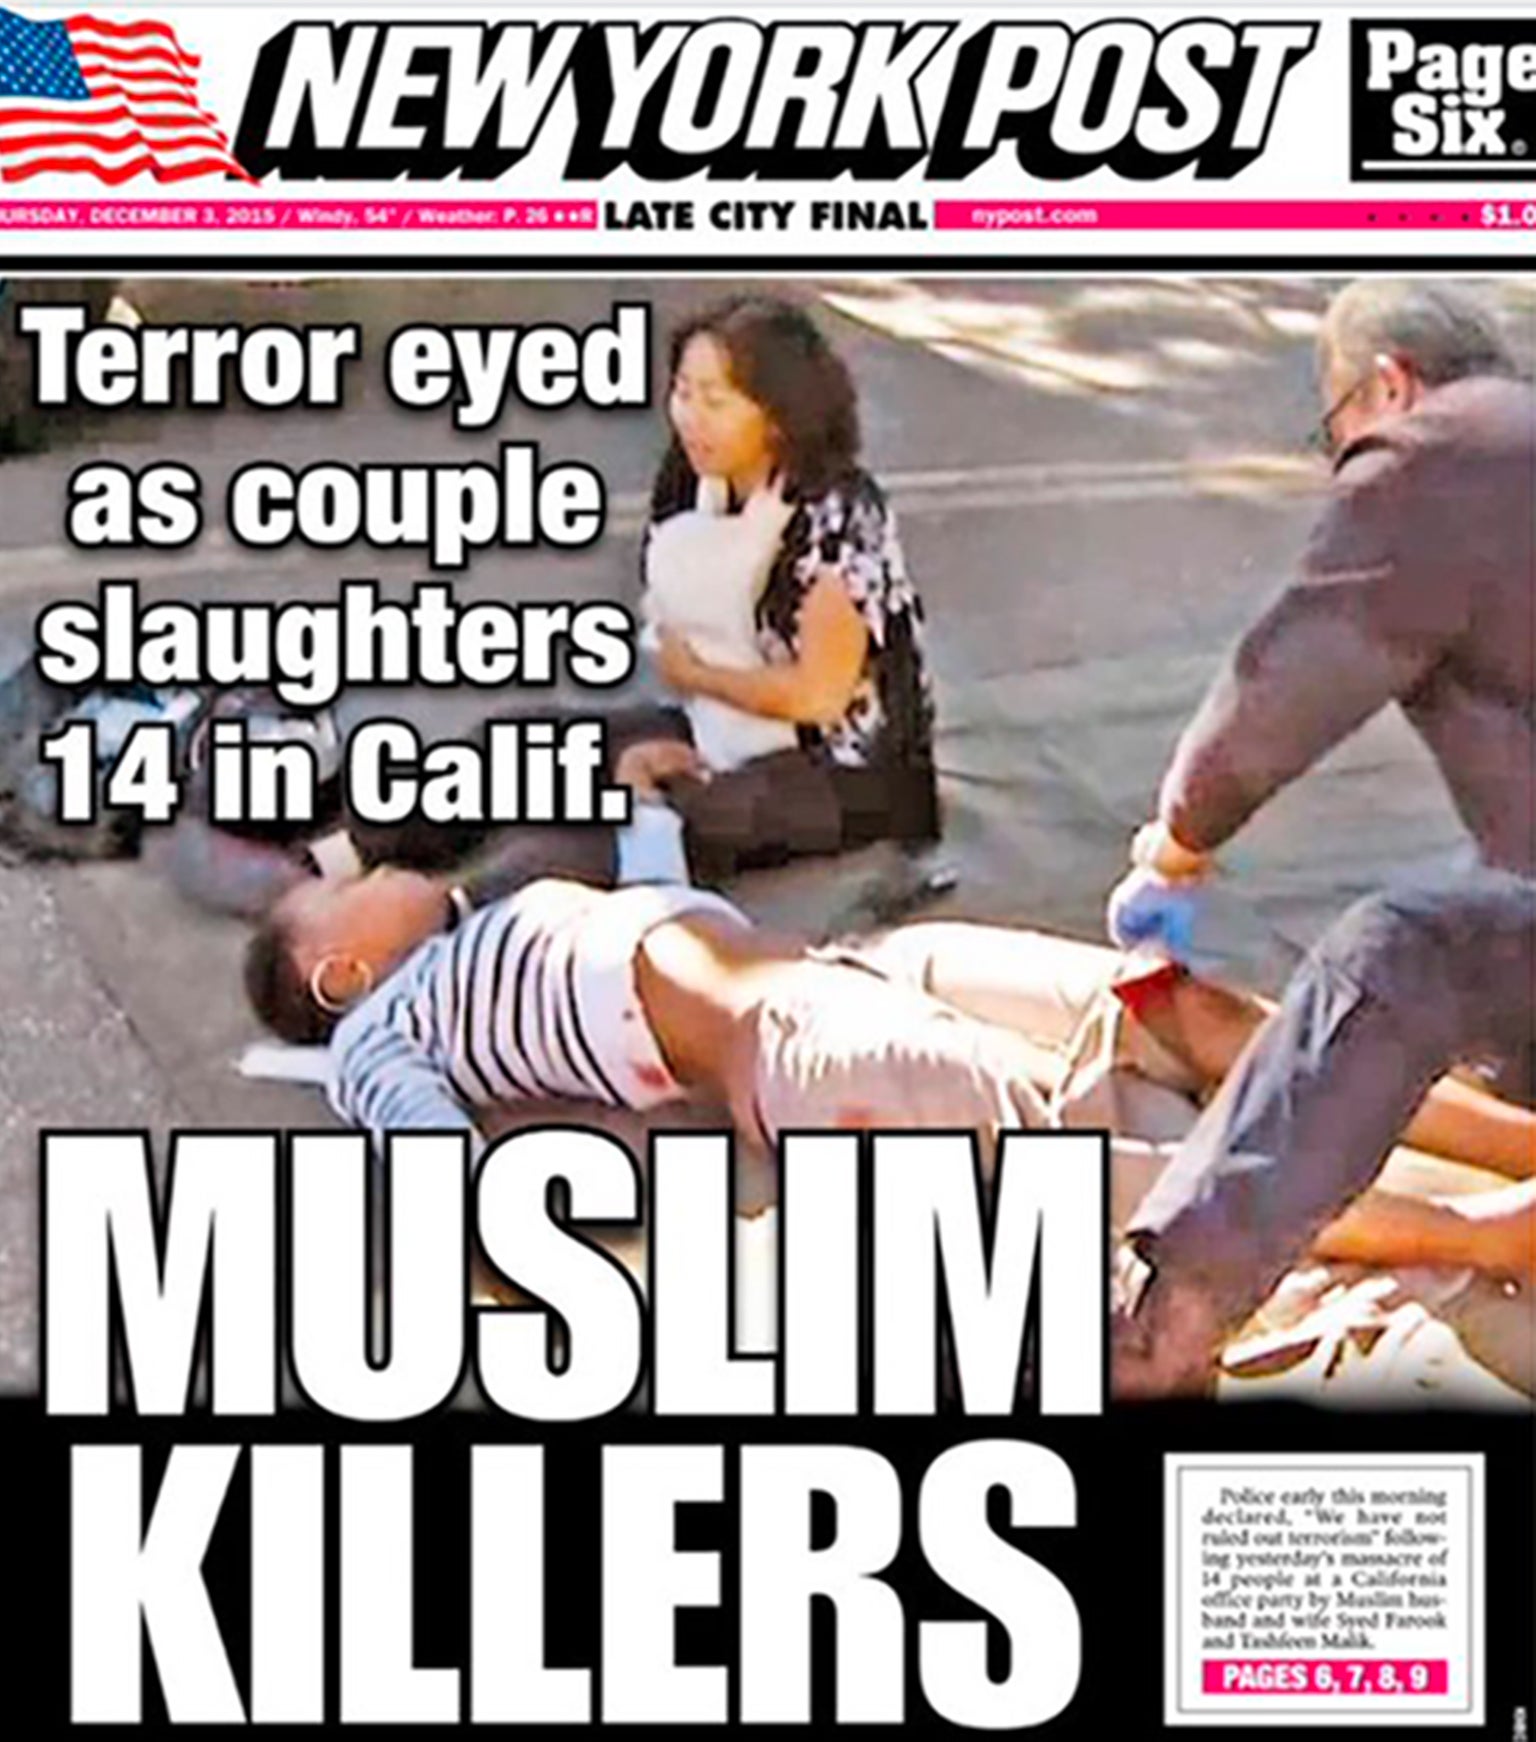 The New York Post digital cover received scores of criticism from readers. New York Post